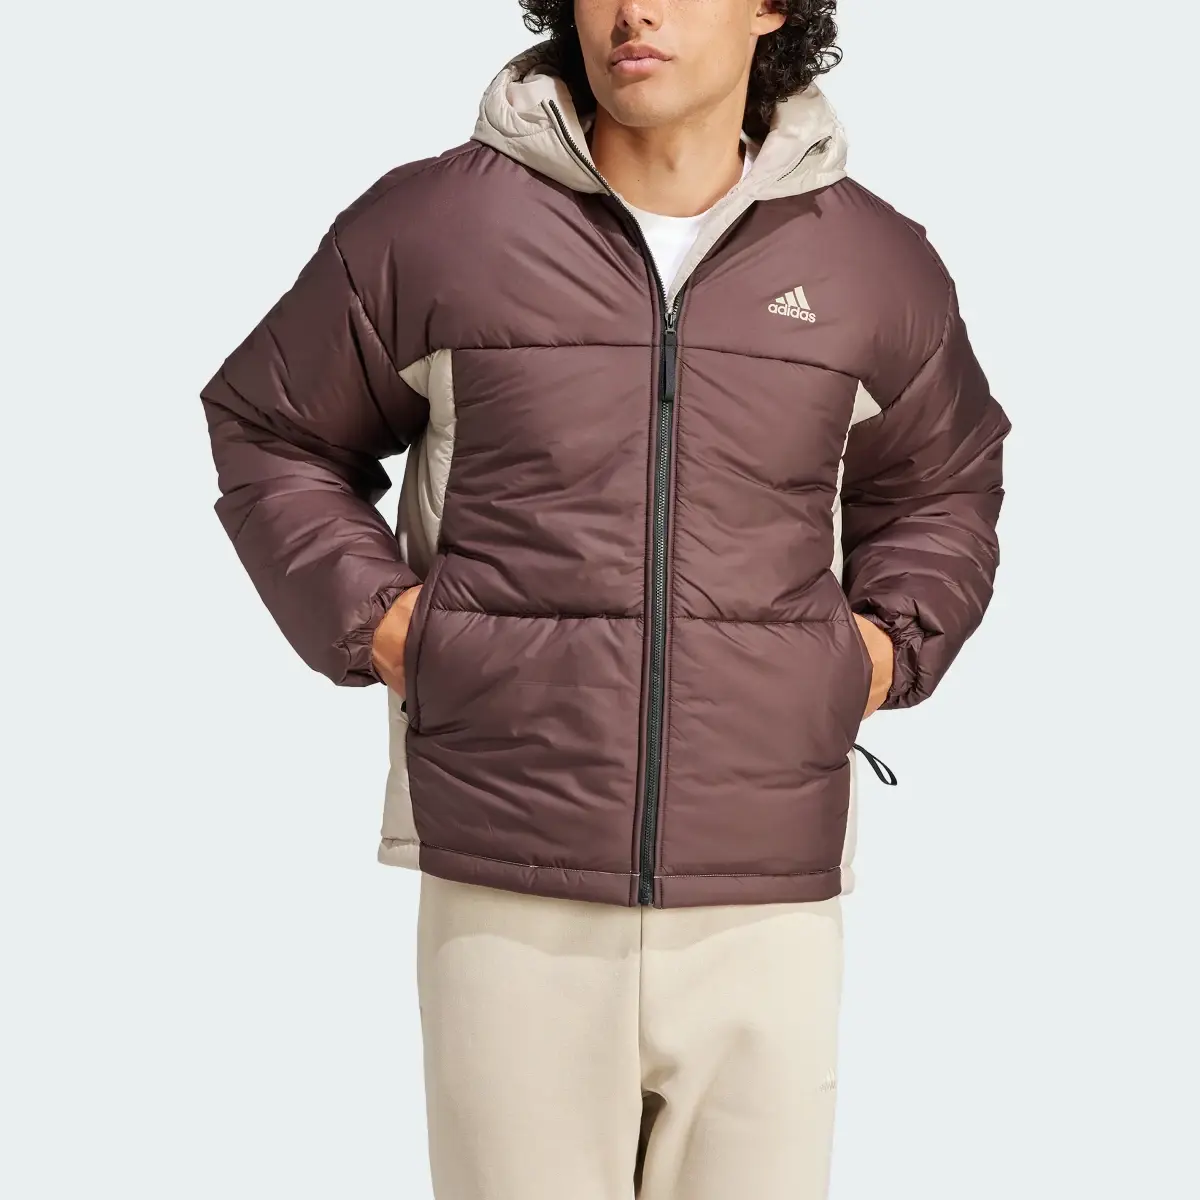 Adidas BSC 3-Stripes Puffy Hooded Jacket. 1